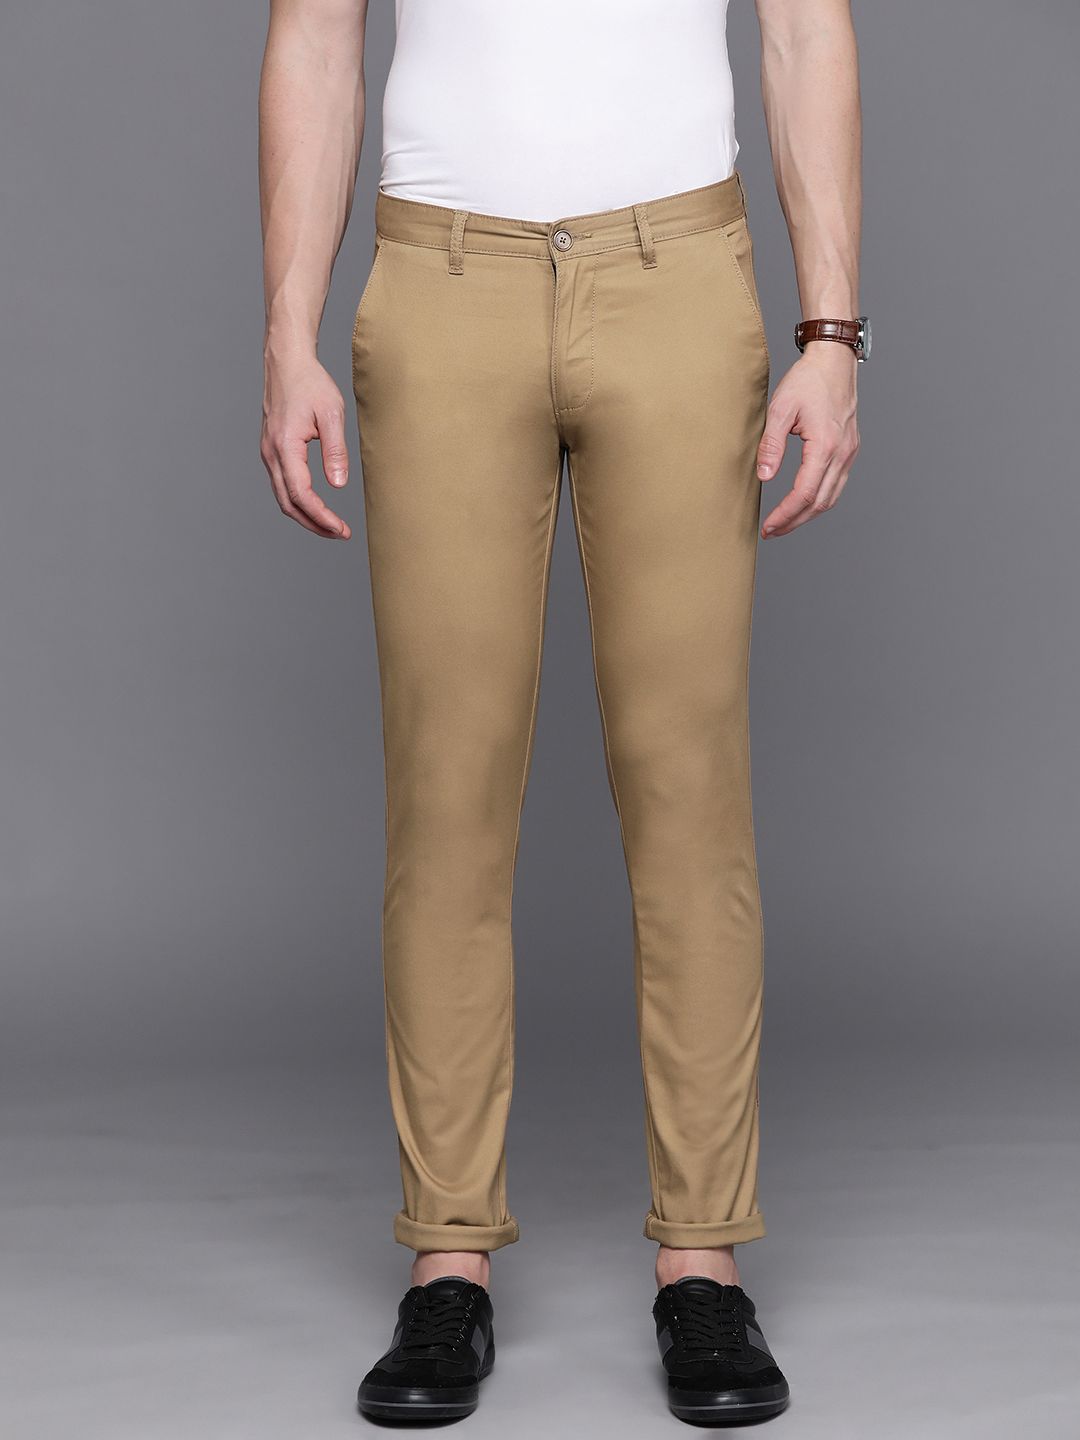 Louis Philippe Jeans Regular Fit Men Beige Trousers - Buy Louis Philippe  Jeans Regular Fit Men Beige Trousers Online at Best Prices in India